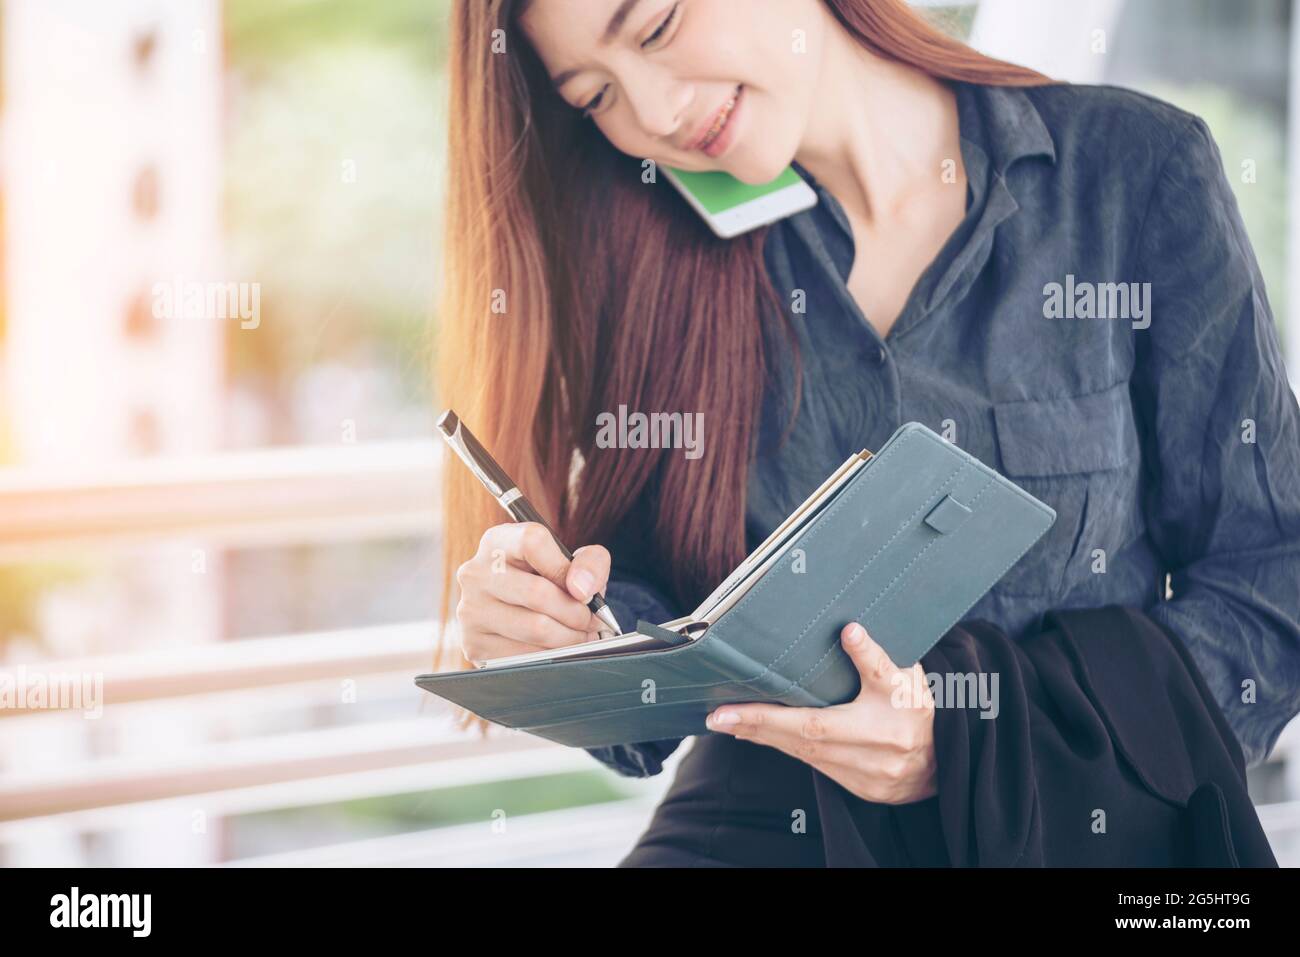 Agenda of planner woman schedule and organize appointment 2019 Calendar Event. Smart Business woman note and schedule to set timetable organize schedu Stock Photo